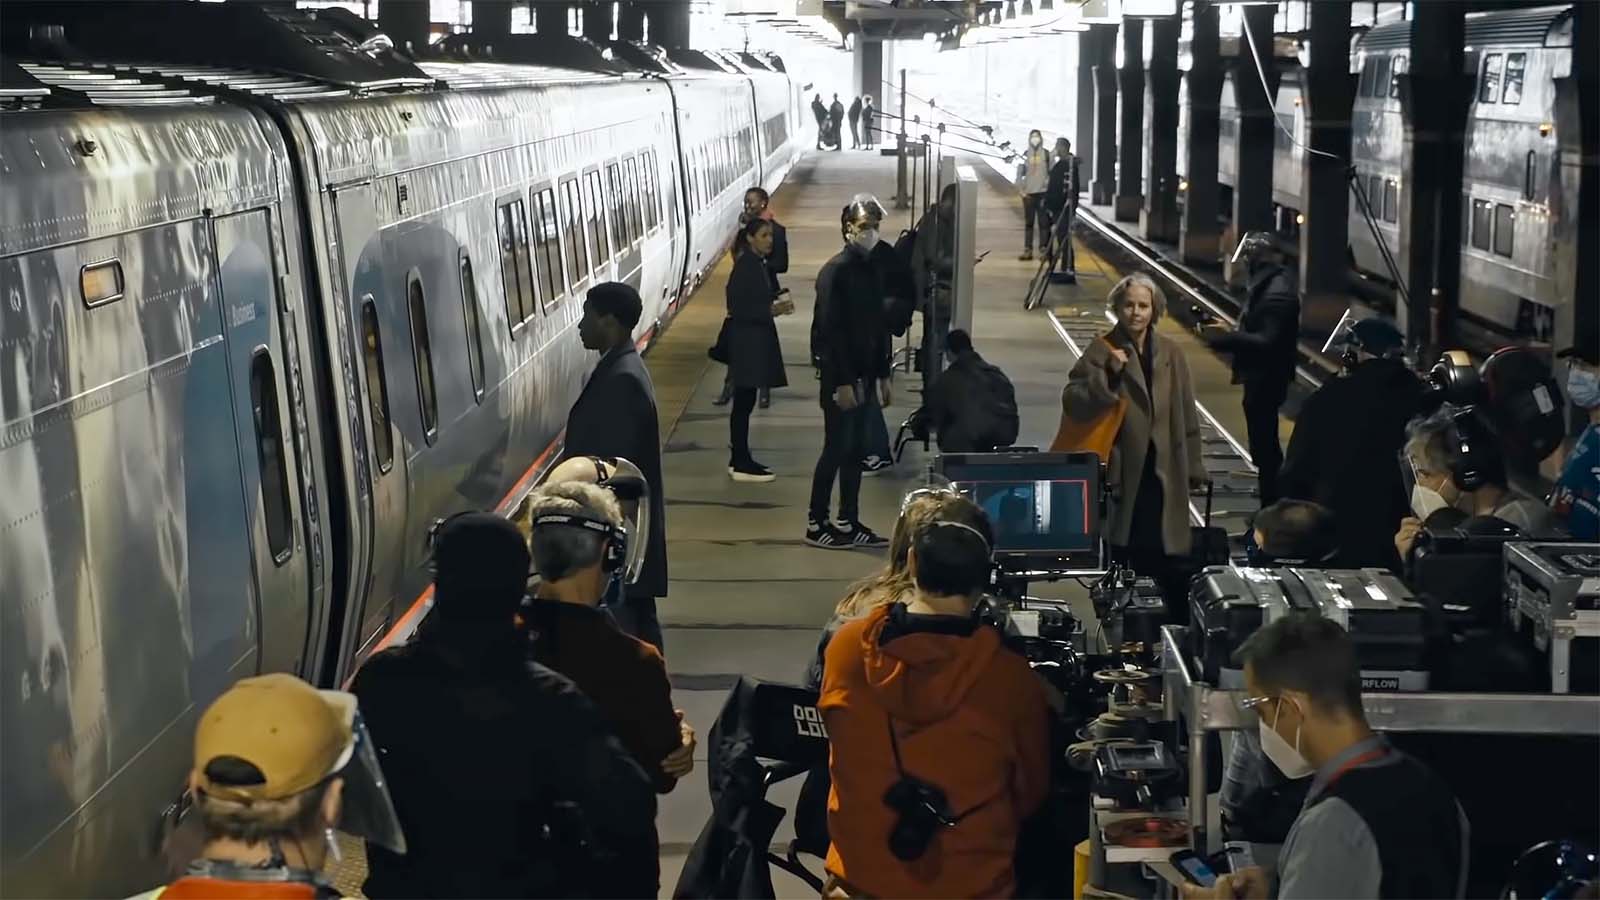 Behind the scenes at the station. Image © Netflix